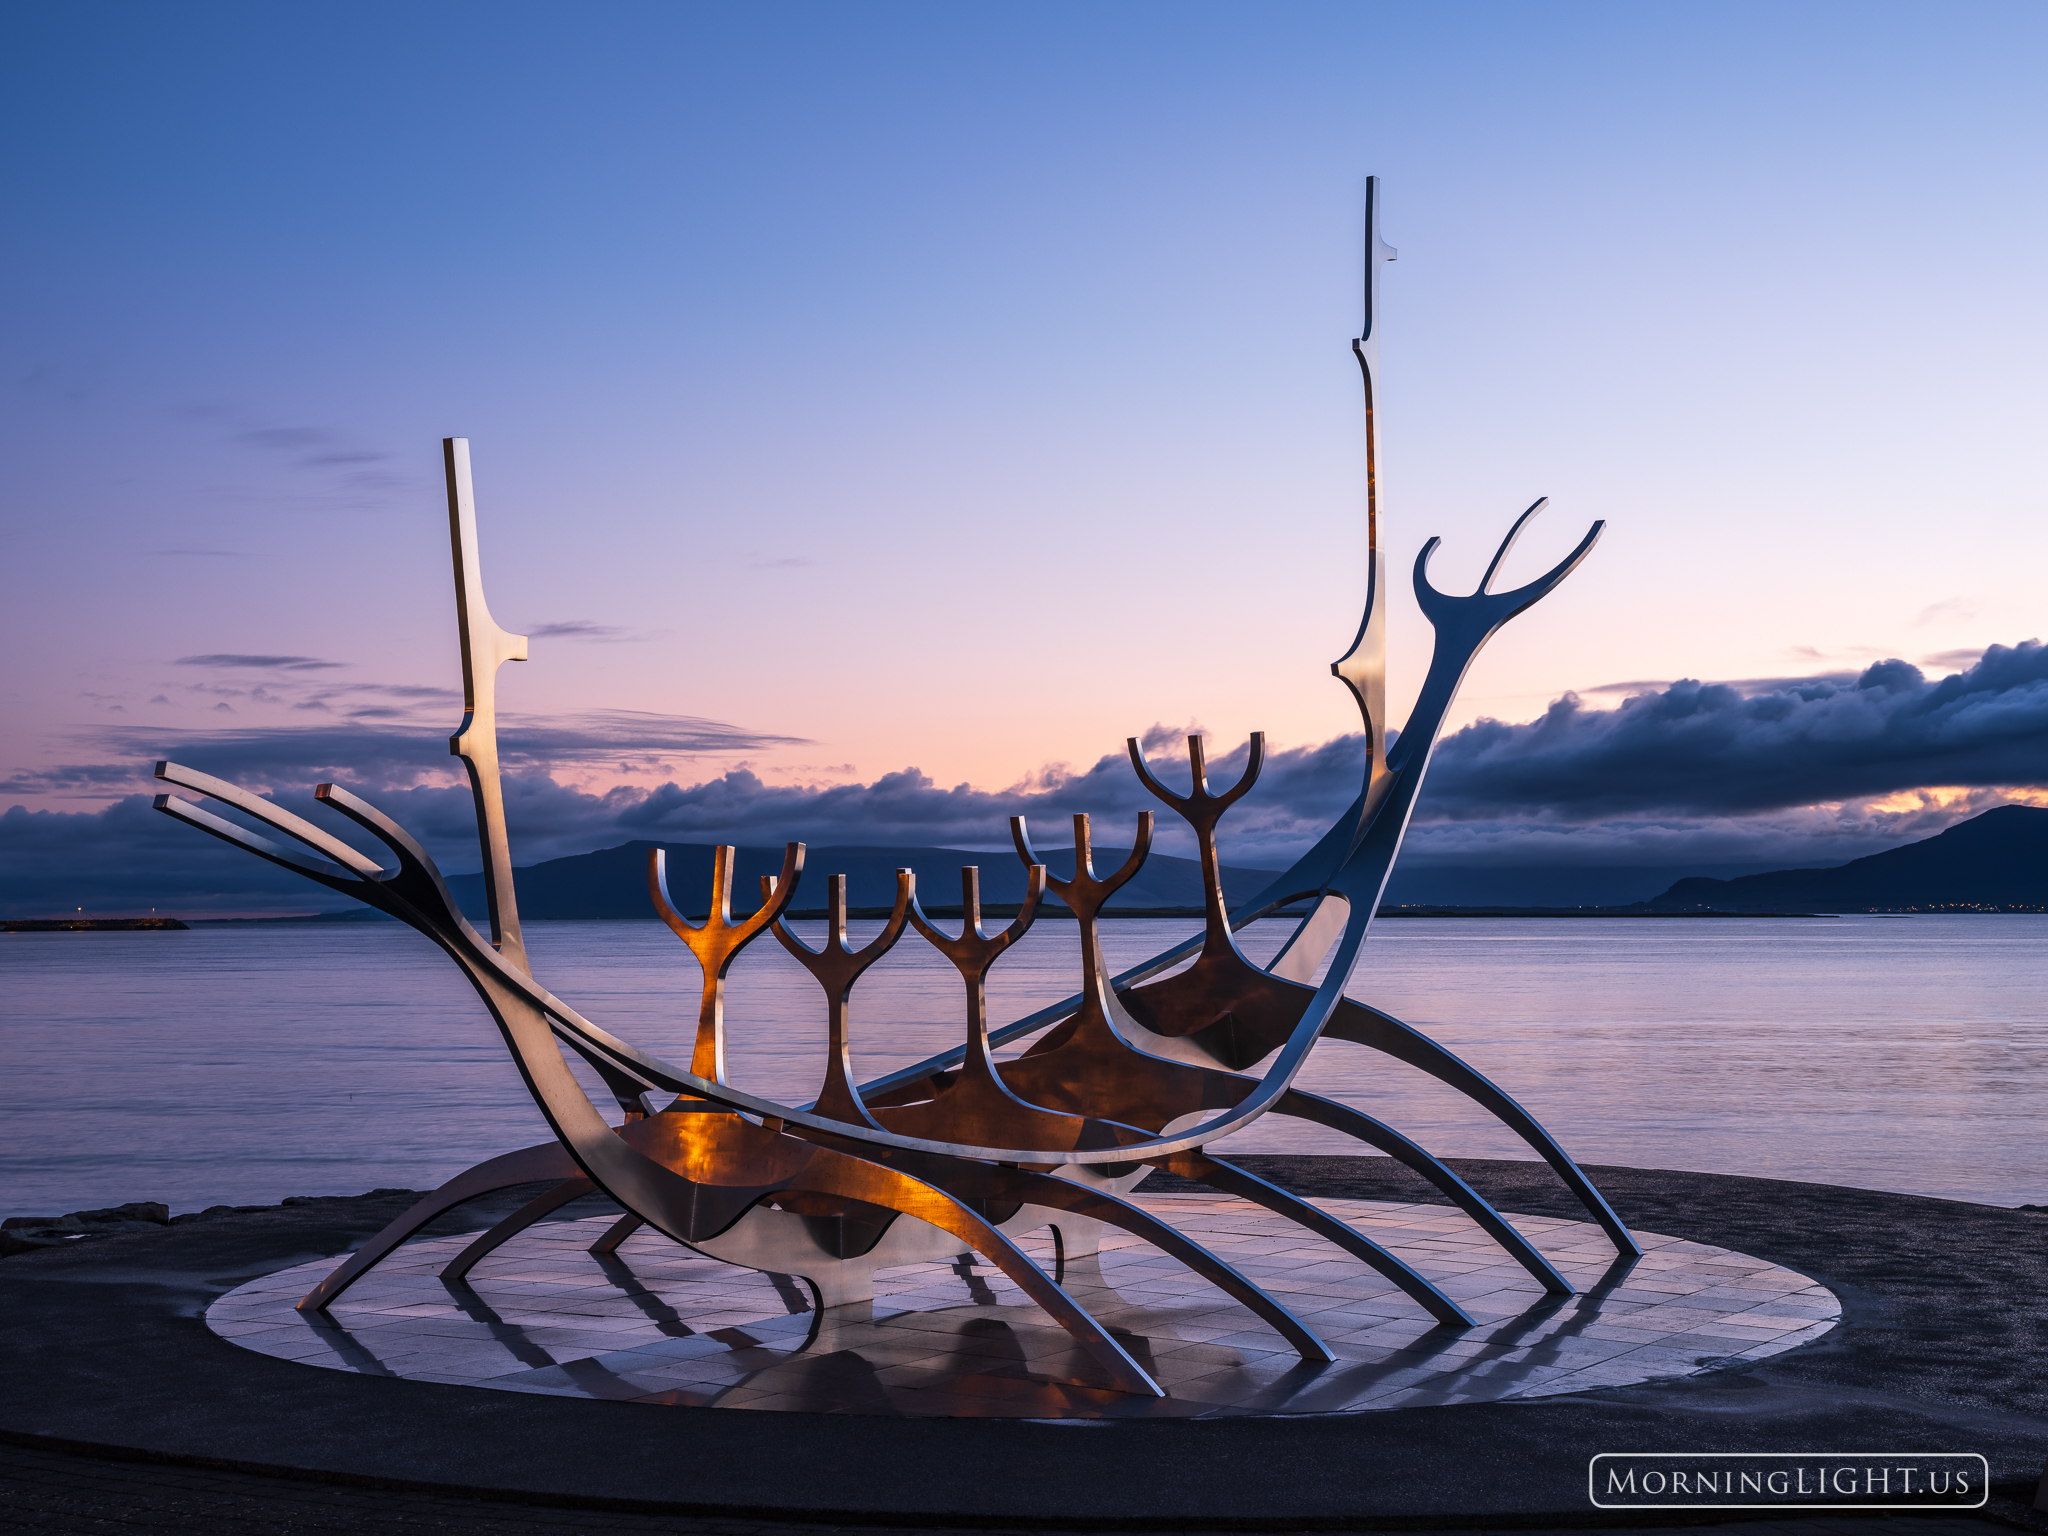 The Sun Voyager sculpture in Reykjavik, Iceland looks ready to sail in the predawn light of a new day.